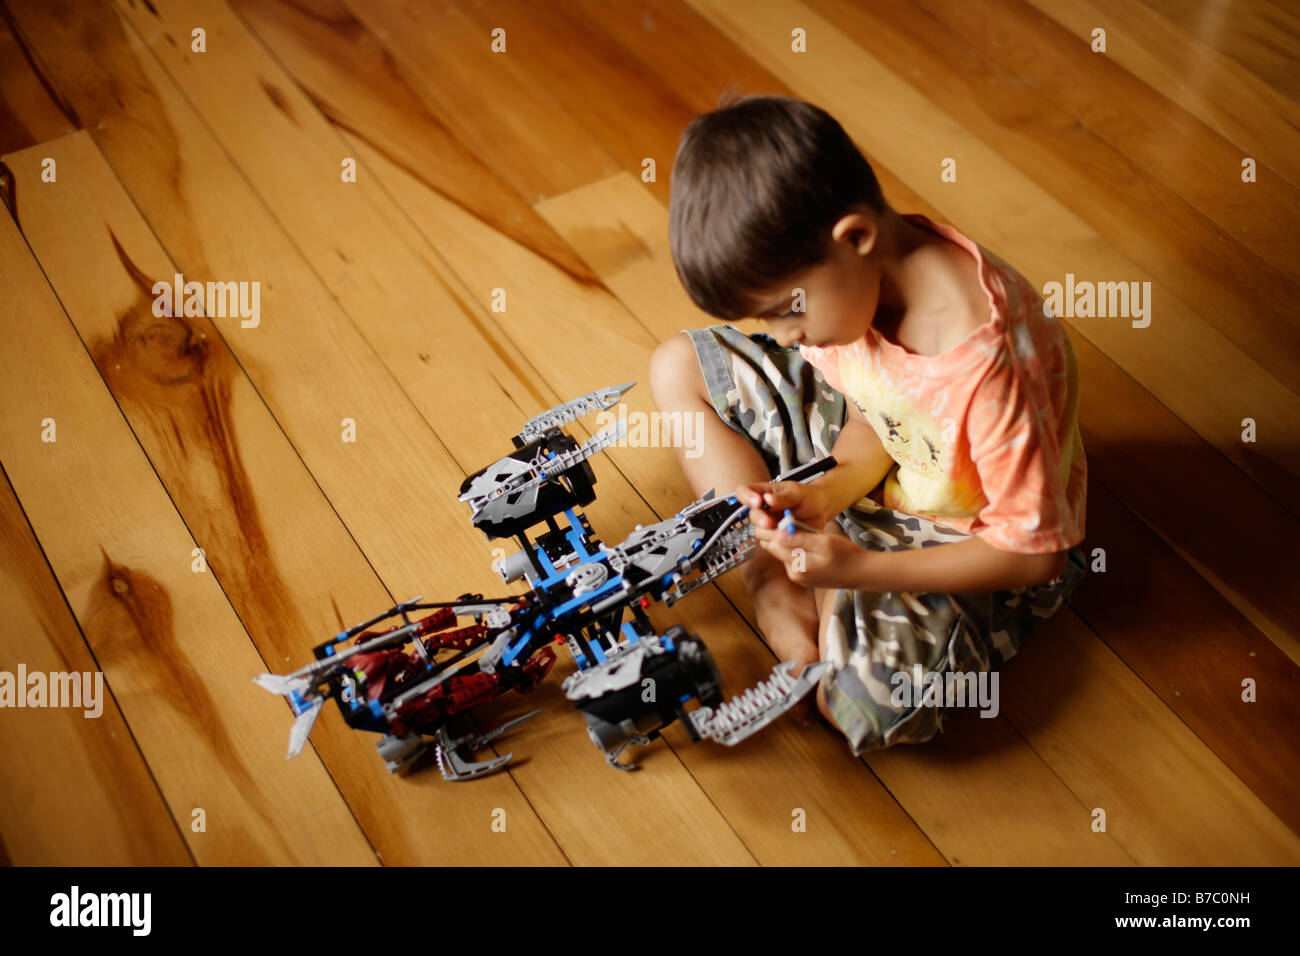 Six year old boy plays with lego bionicle spaceship toy Stock Photo